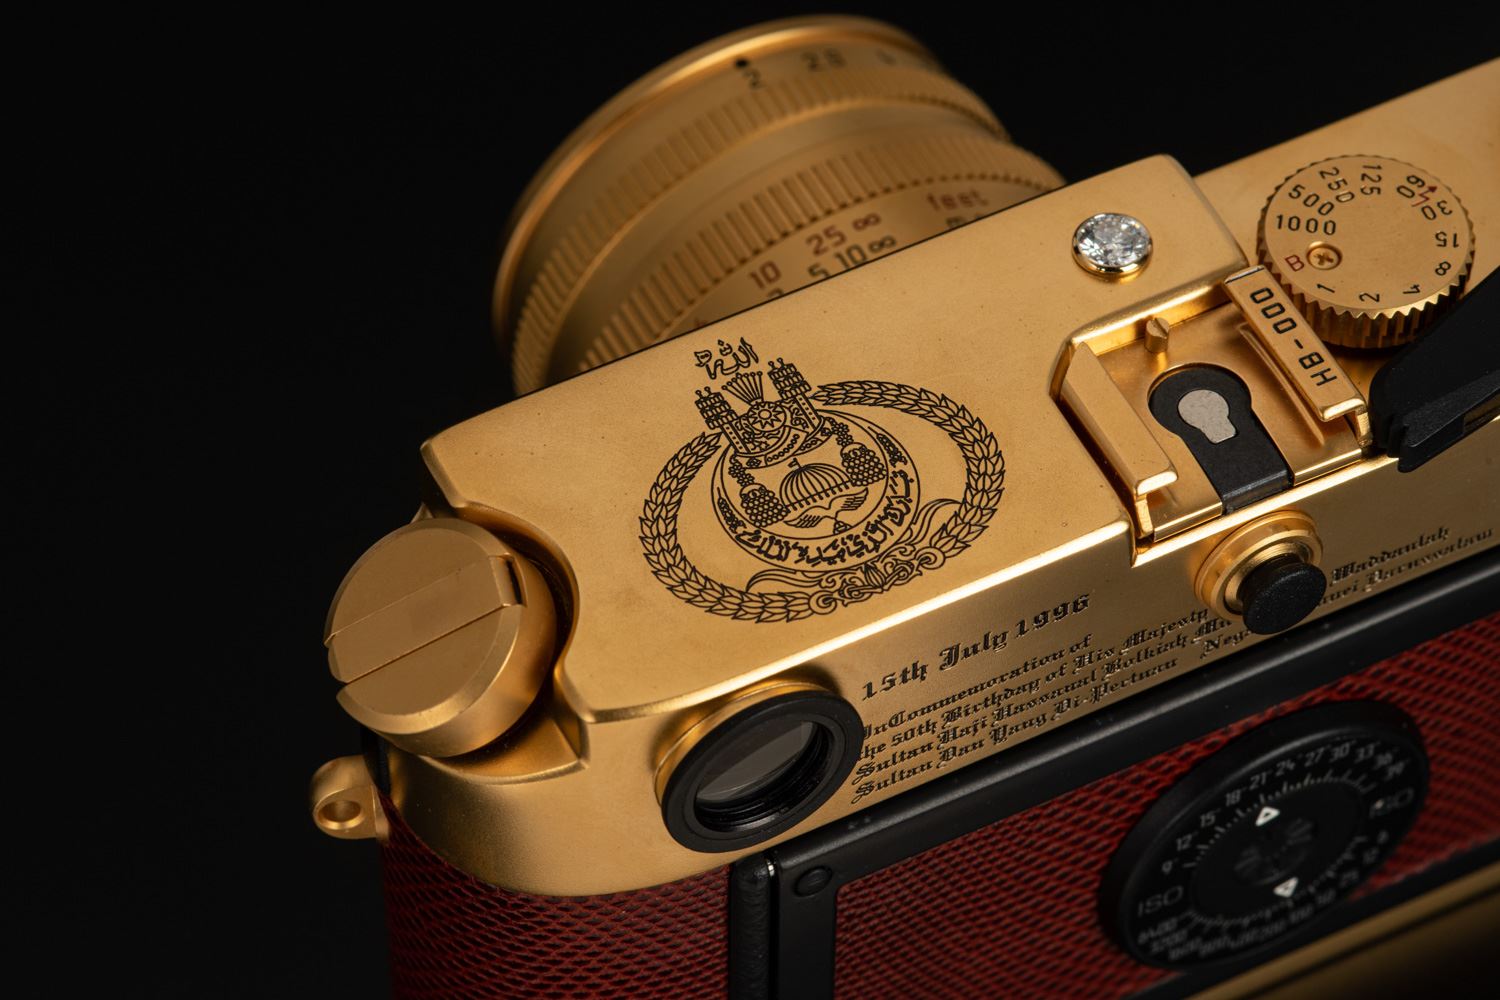 Picture of Leica M6 Brunei Gold Set with Diamond